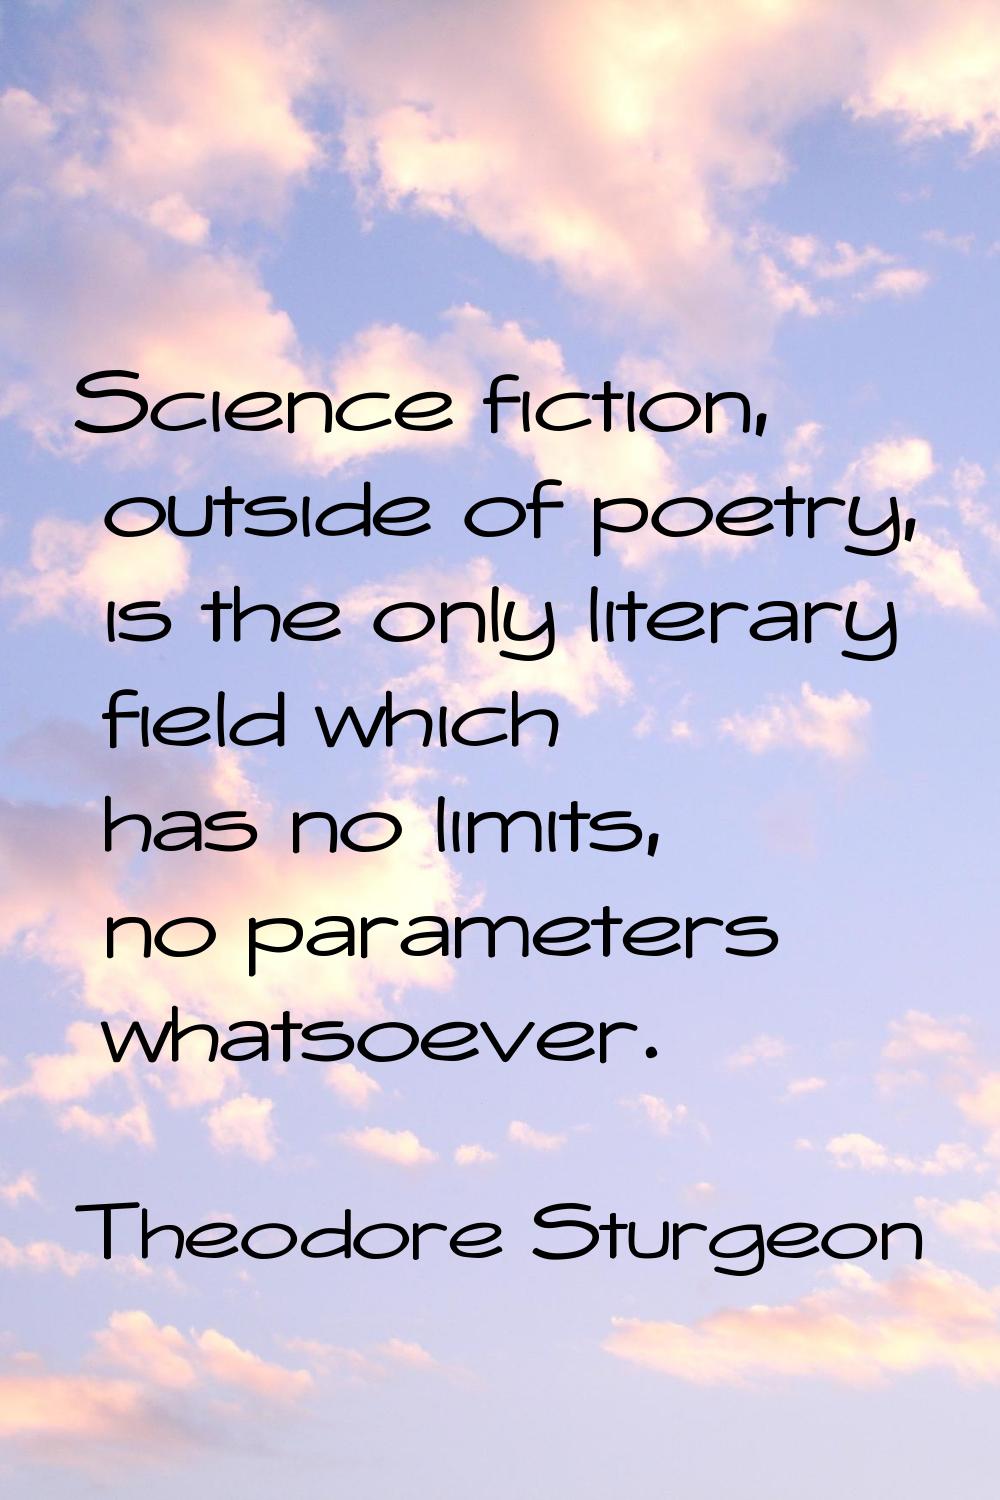 Science fiction, outside of poetry, is the only literary field which has no limits, no parameters w